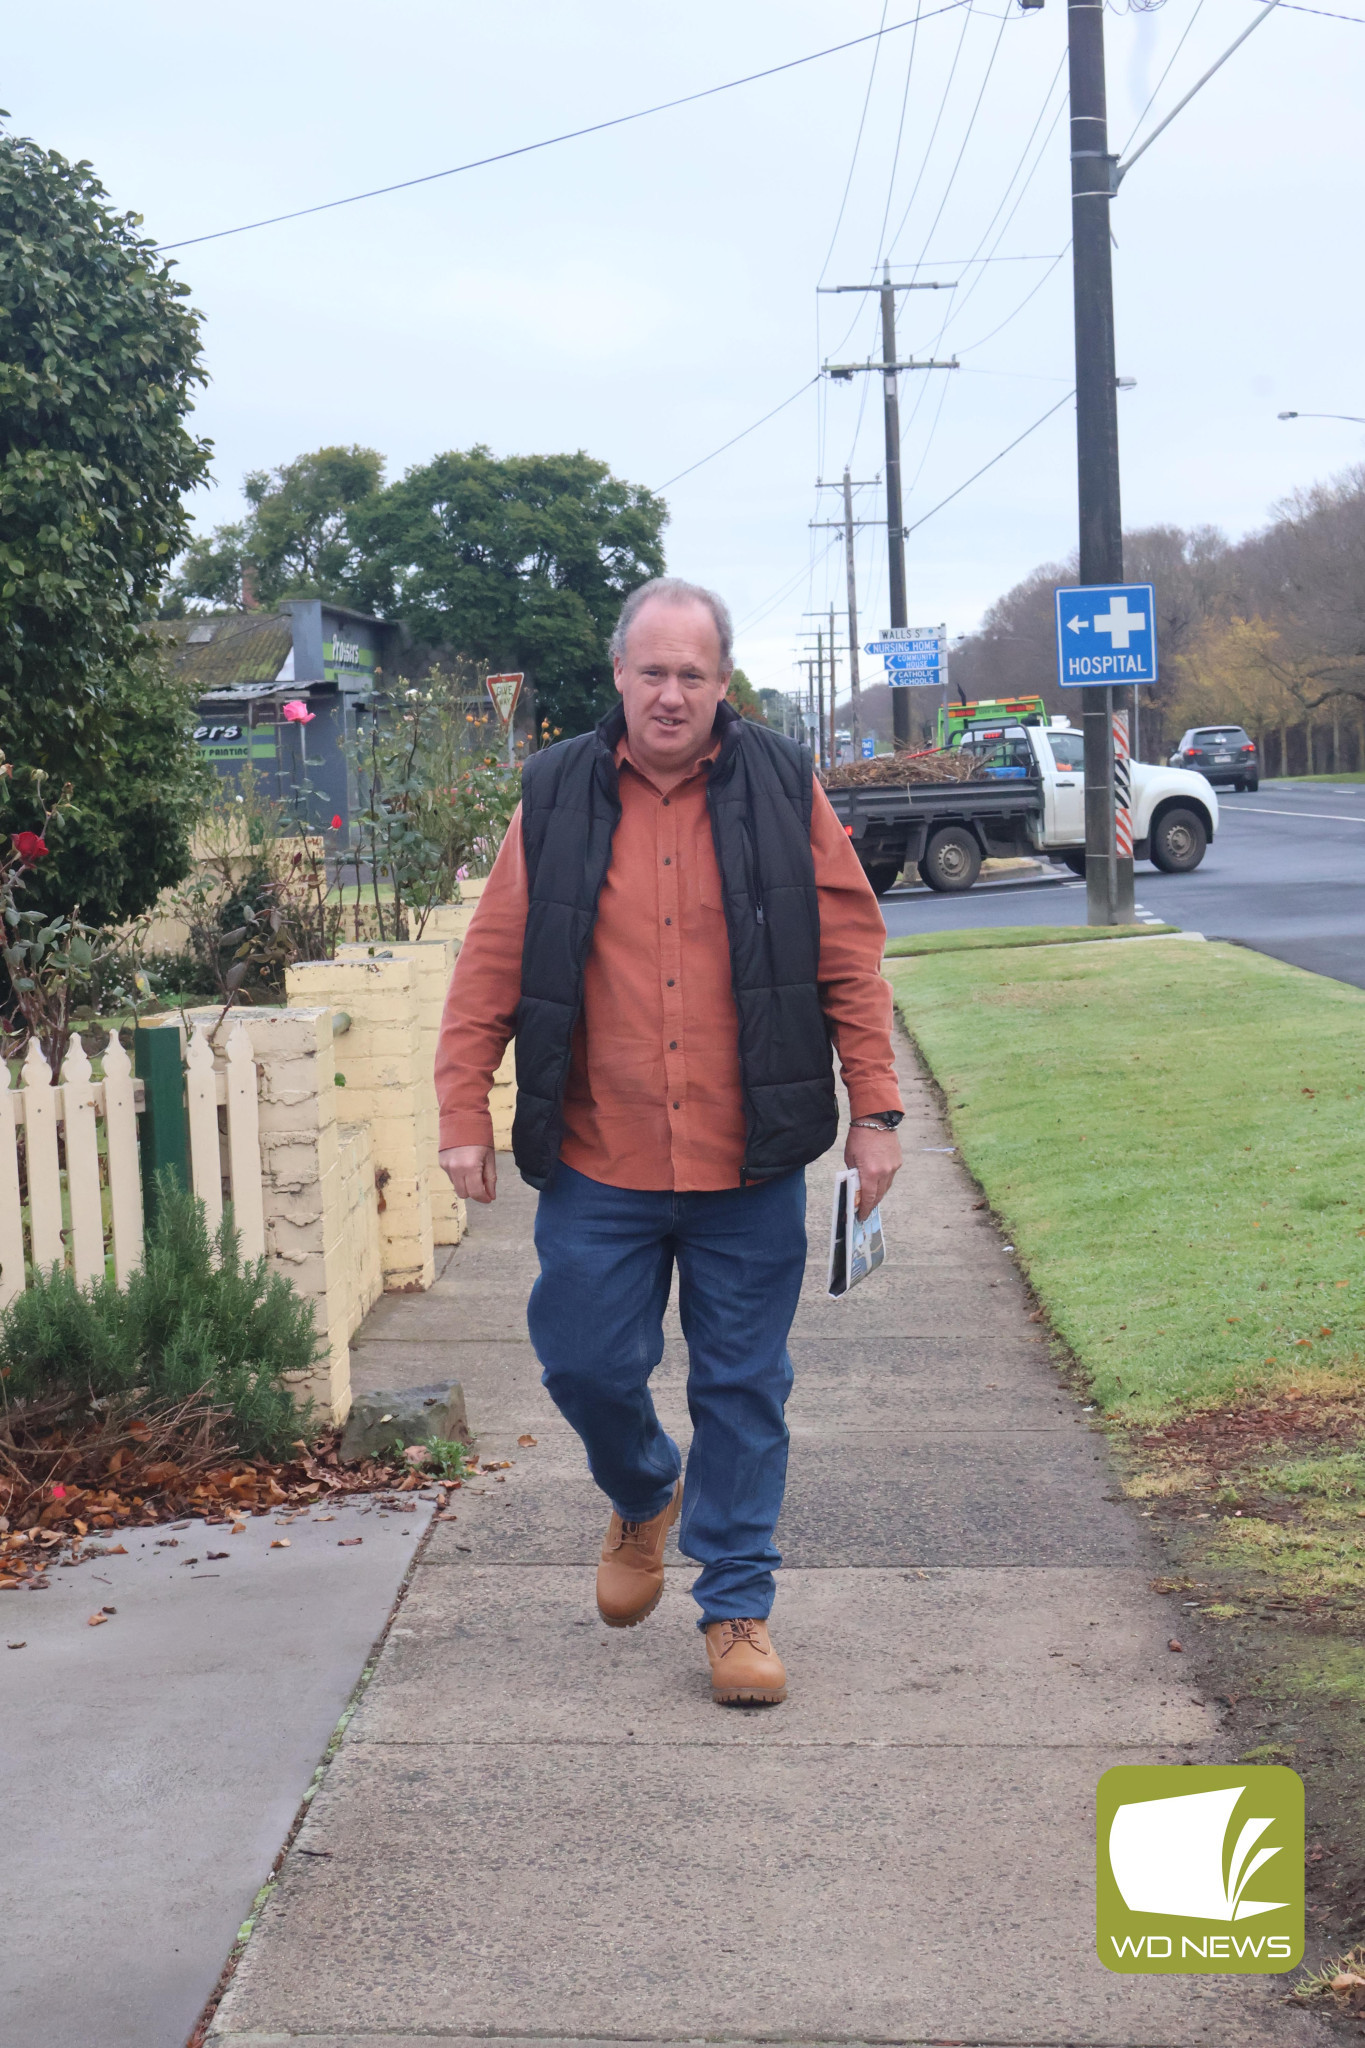 One step at a time: Peter James is walking around town to raise funds for The Smith Family as part of their Dream Run fundraiser.